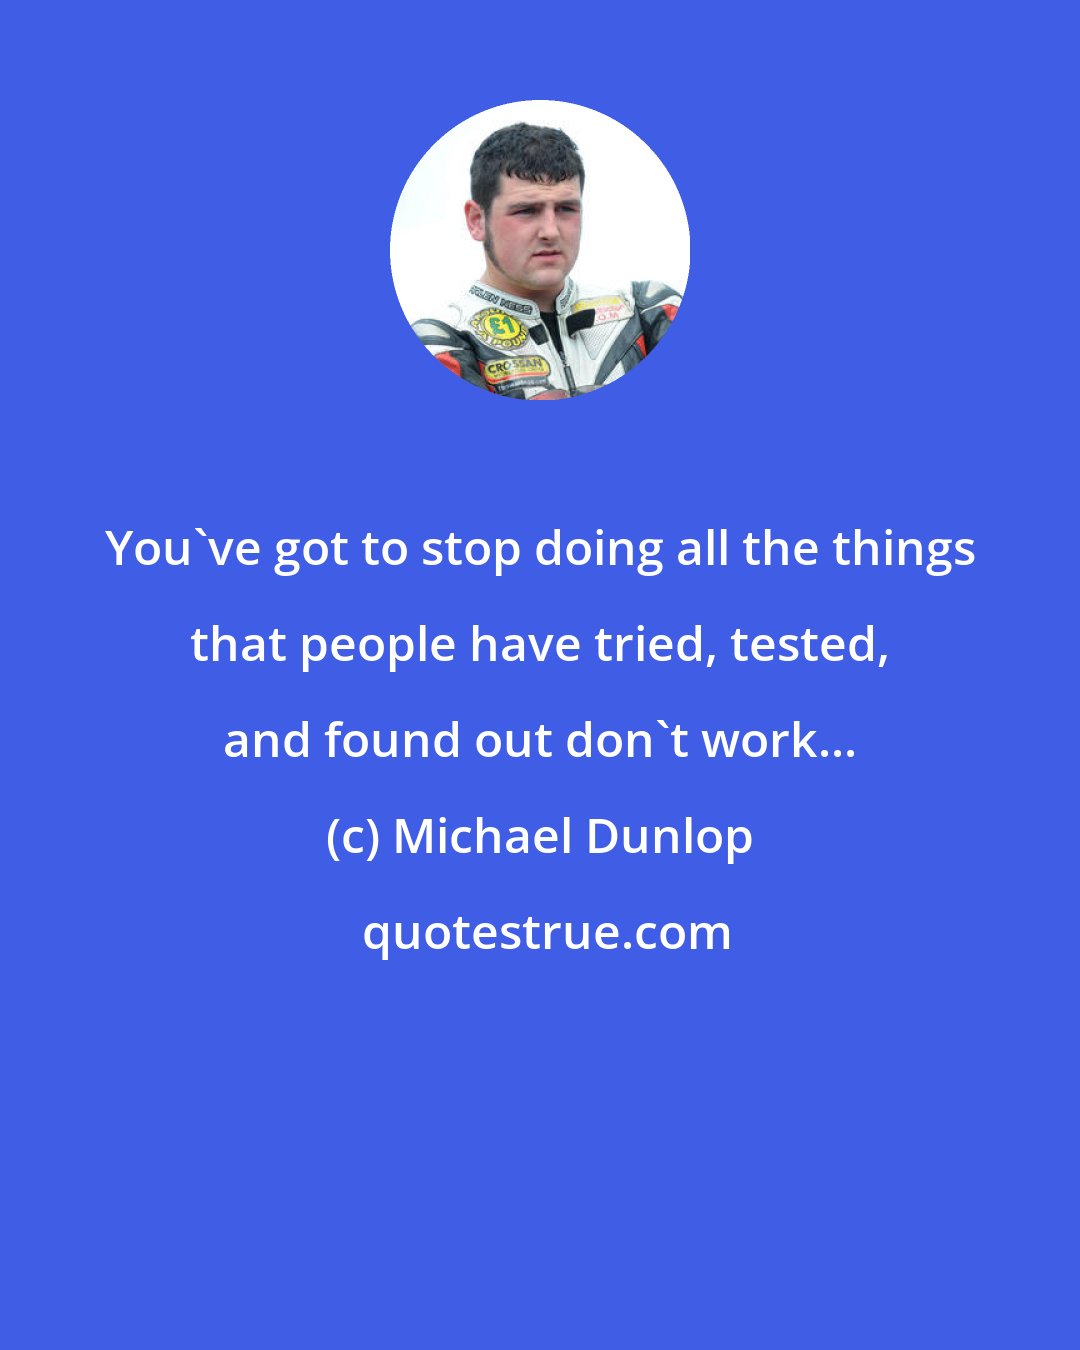 Michael Dunlop: You've got to stop doing all the things that people have tried, tested, and found out don't work...